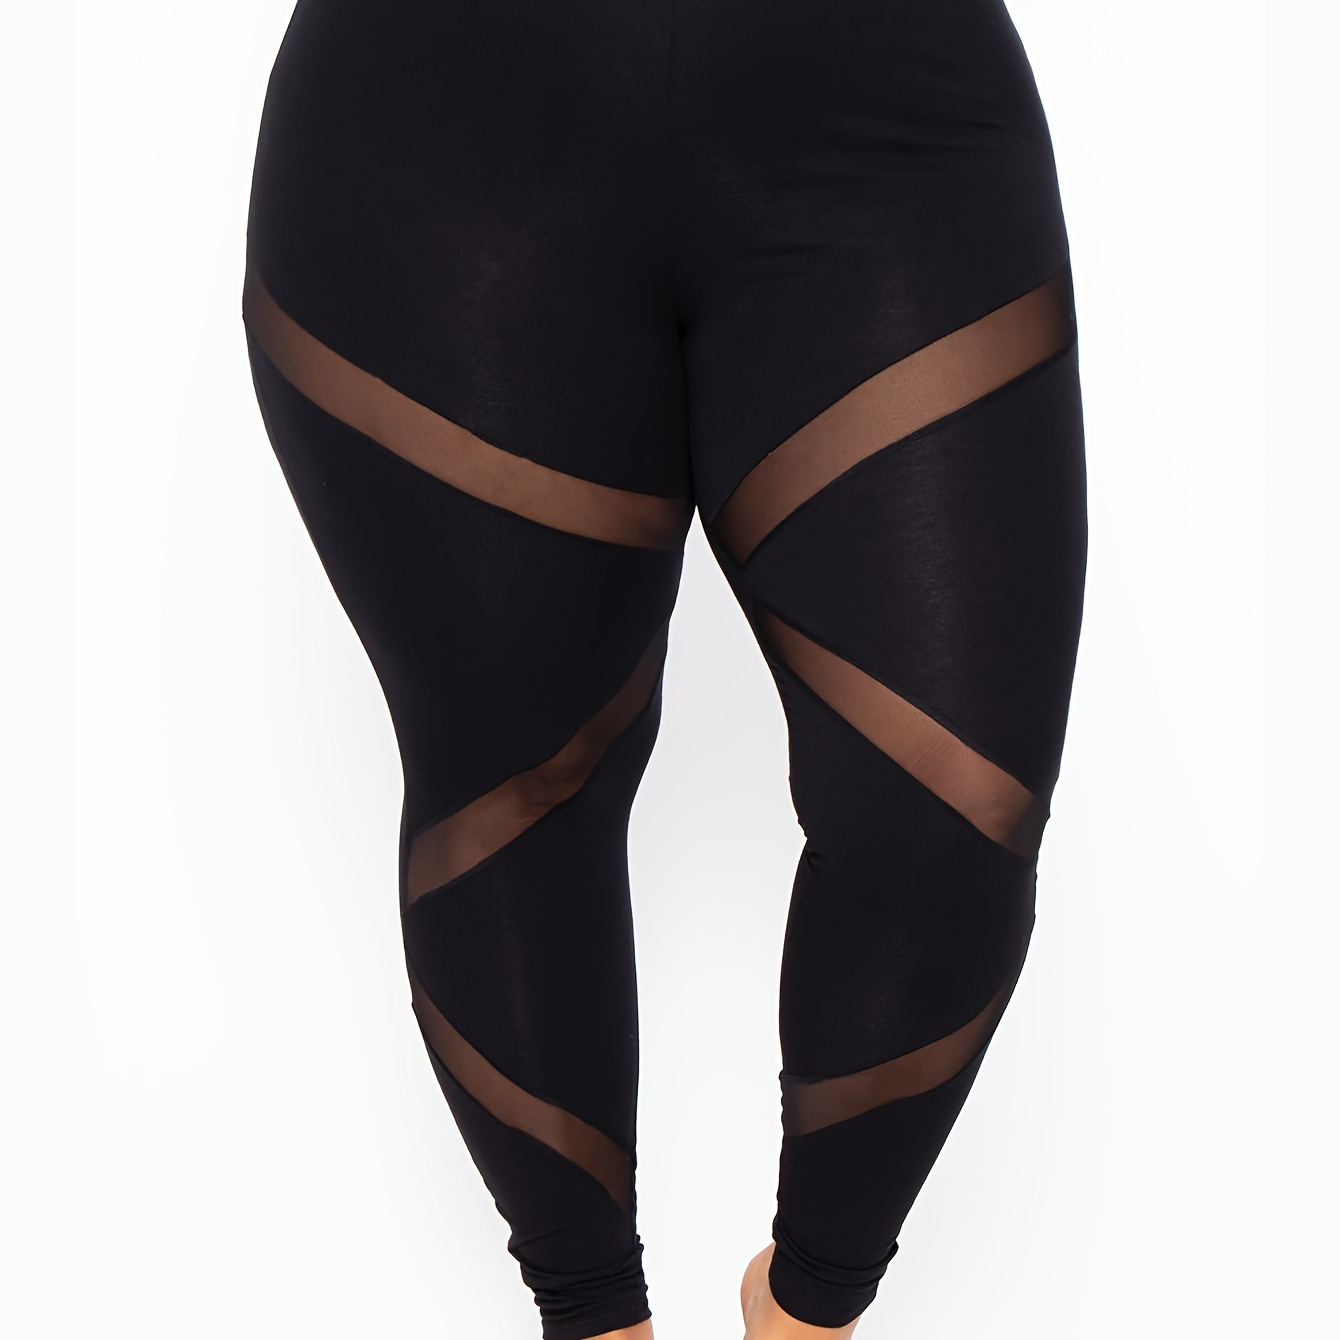 

Leggings with mesh details, comfortable and stretchy, for women of all sizes